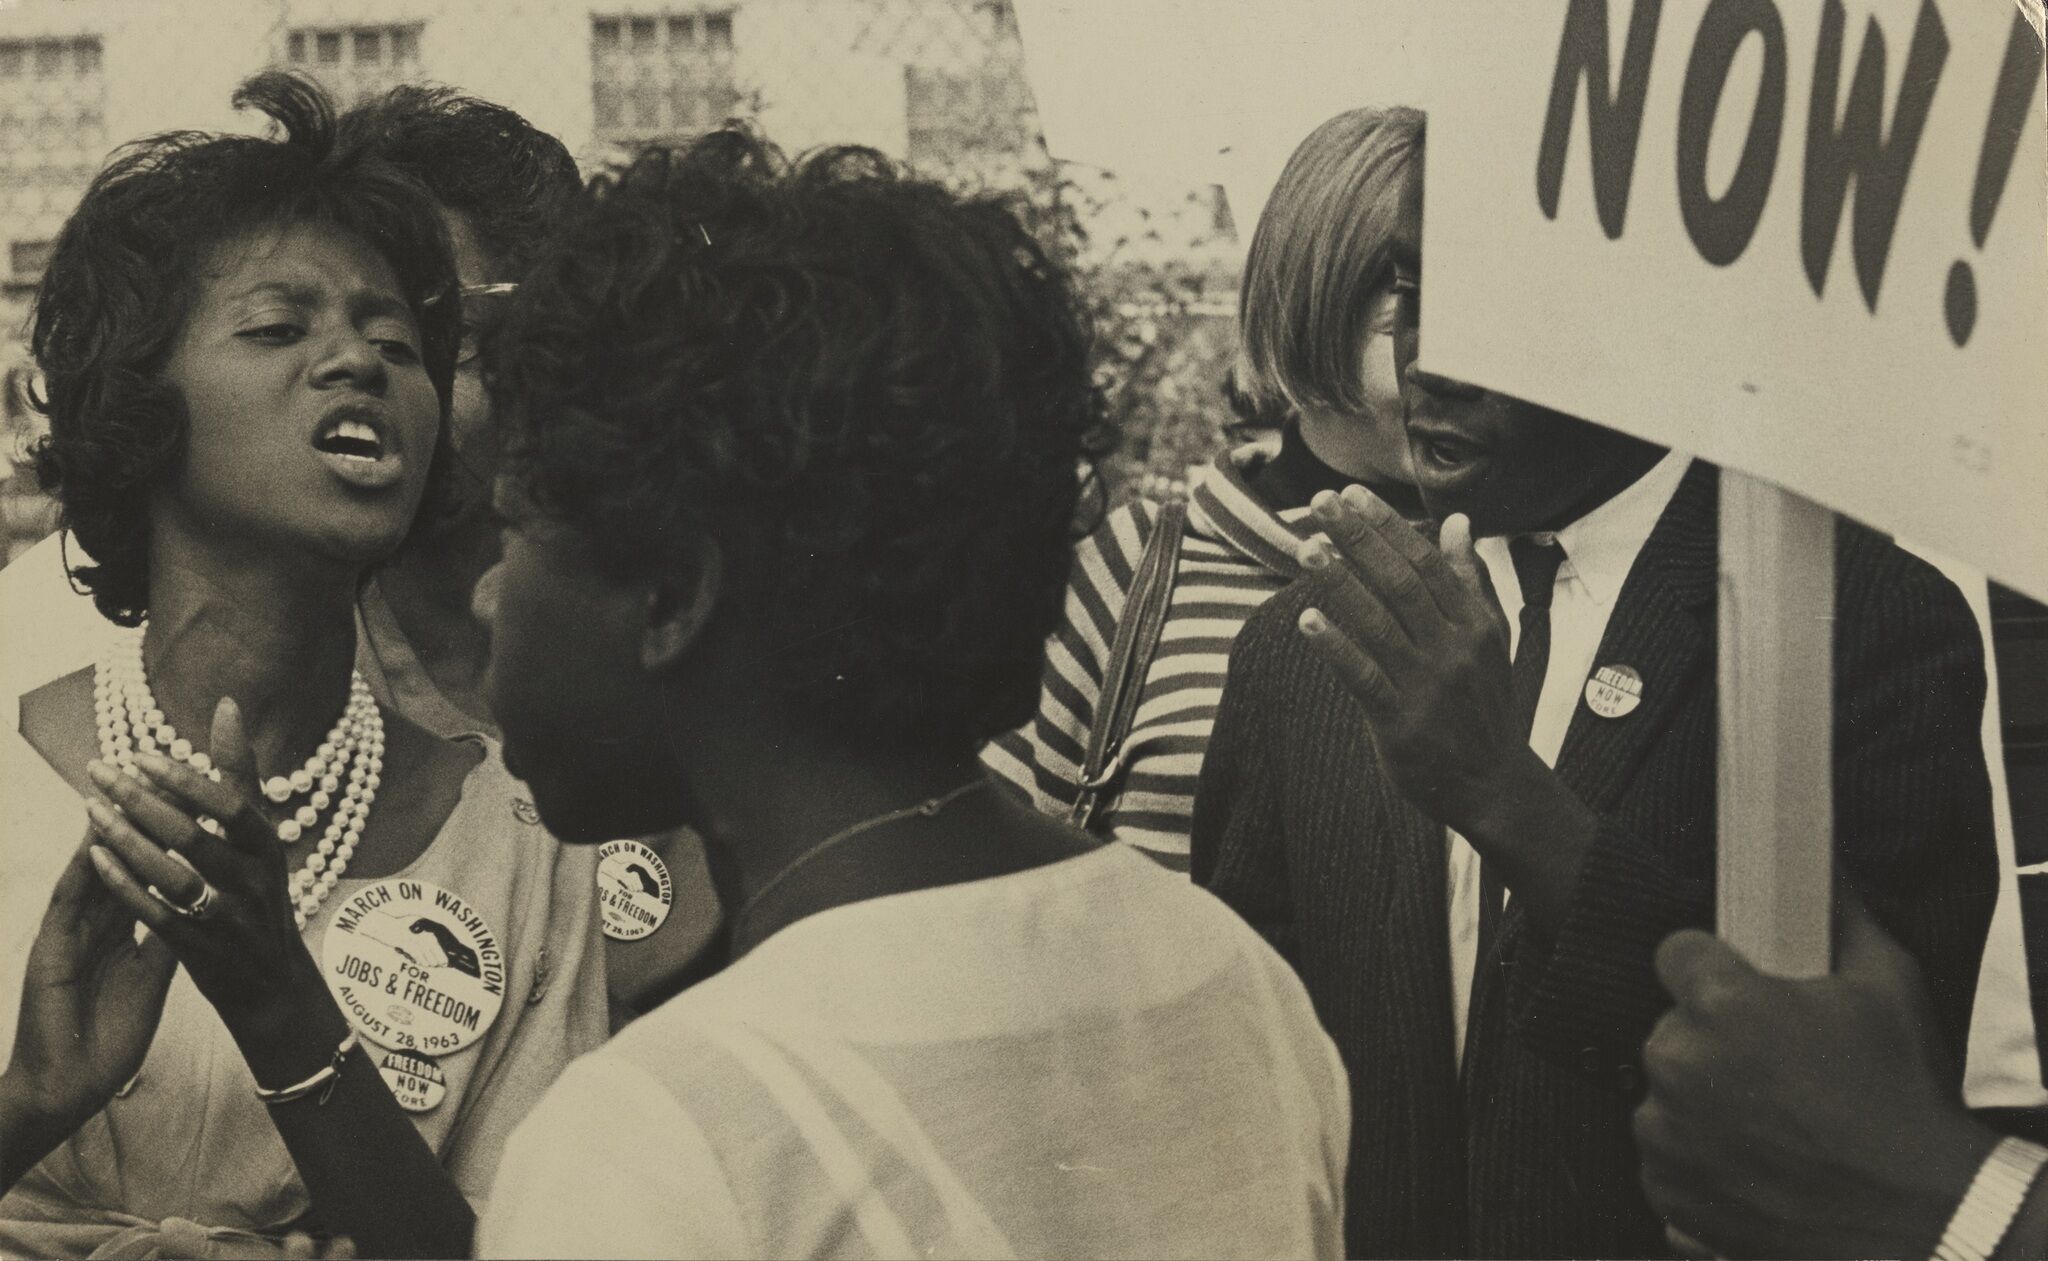 A woman within a group of people speaking out loud alongside a partial view of a person holding a picket sign.